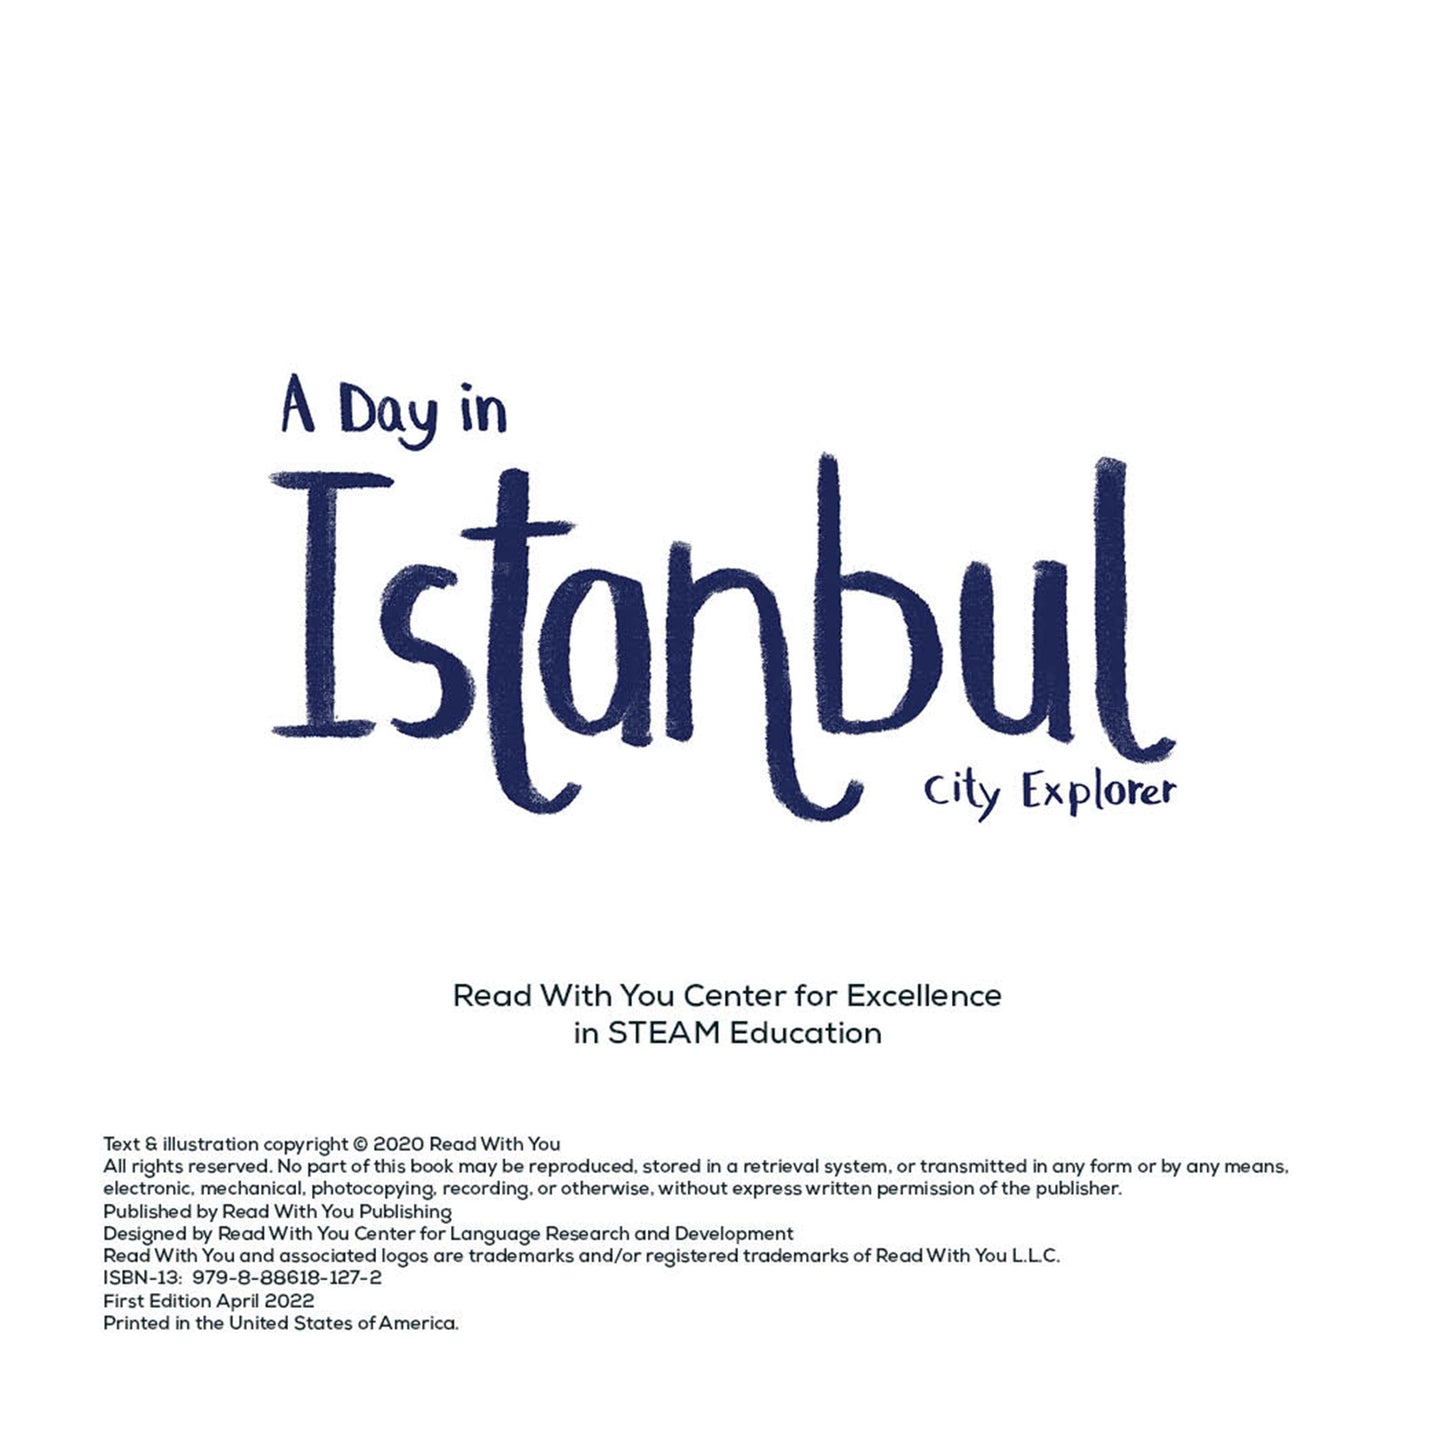 A Day in Istanbul